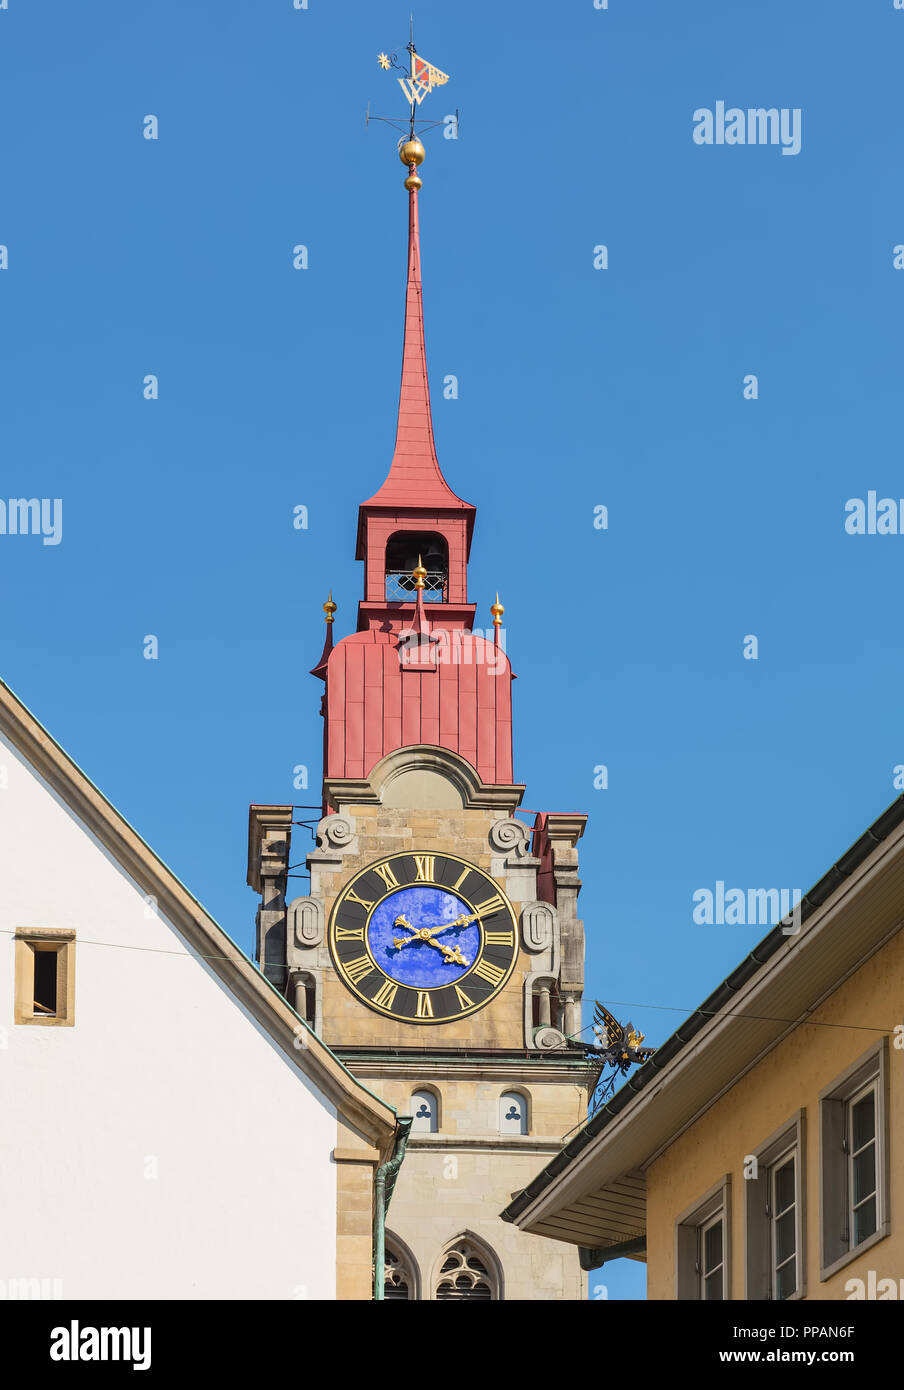 One of two towers of the City Church of Winterthur (German: Stadtkirche Winterthur) in Switzerland against blue sky. Stock Photo